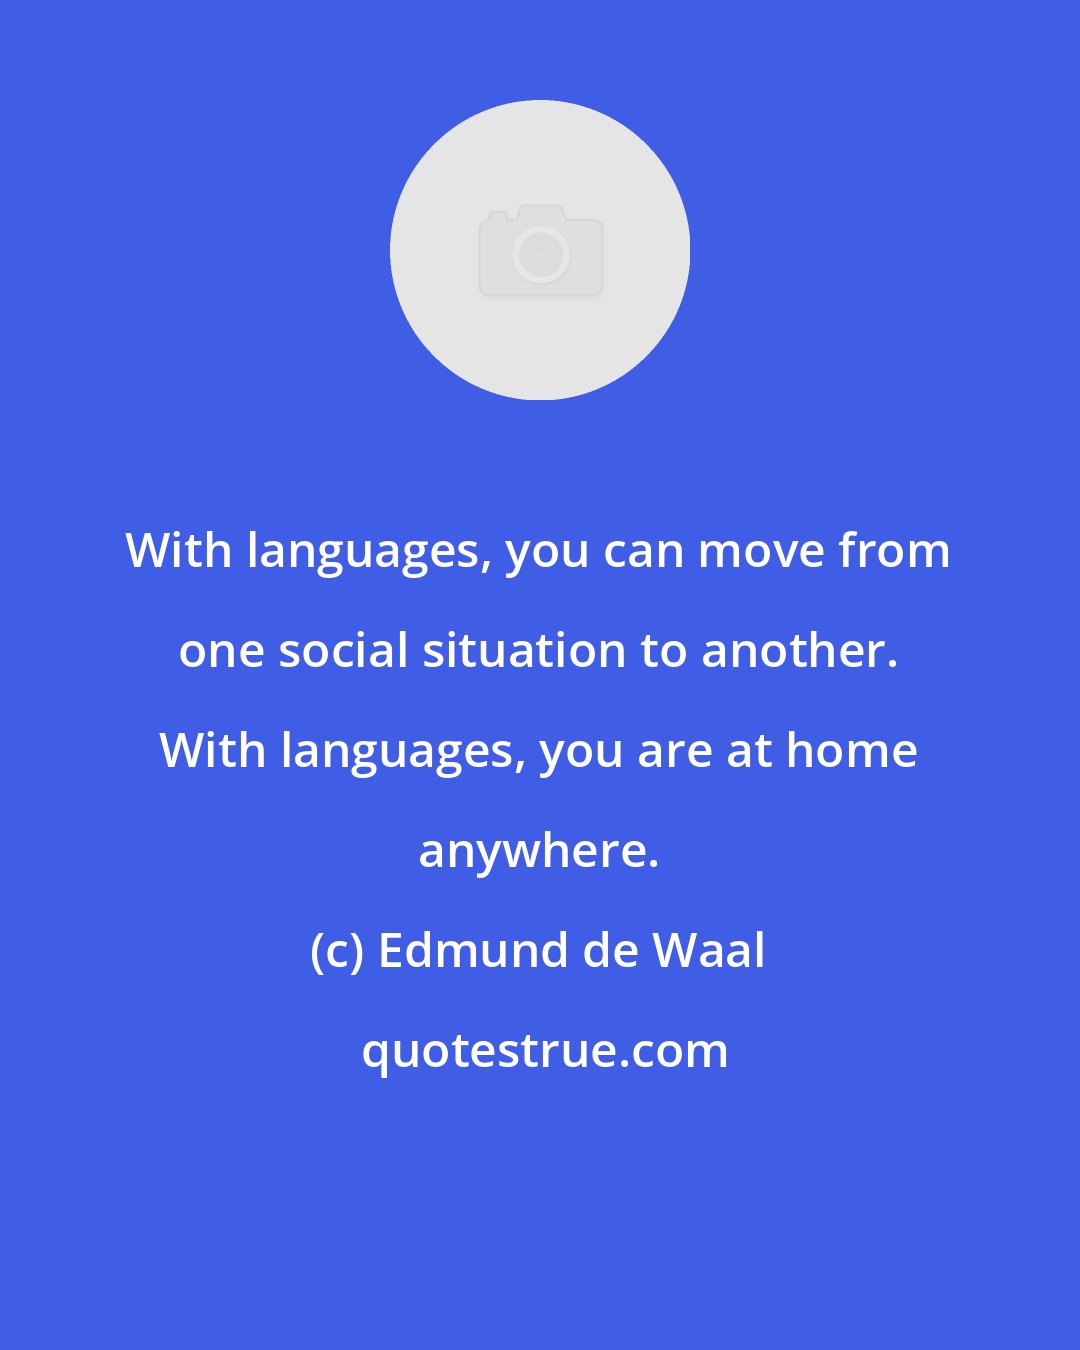 Edmund de Waal: With languages, you can move from one social situation to another. With languages, you are at home anywhere.